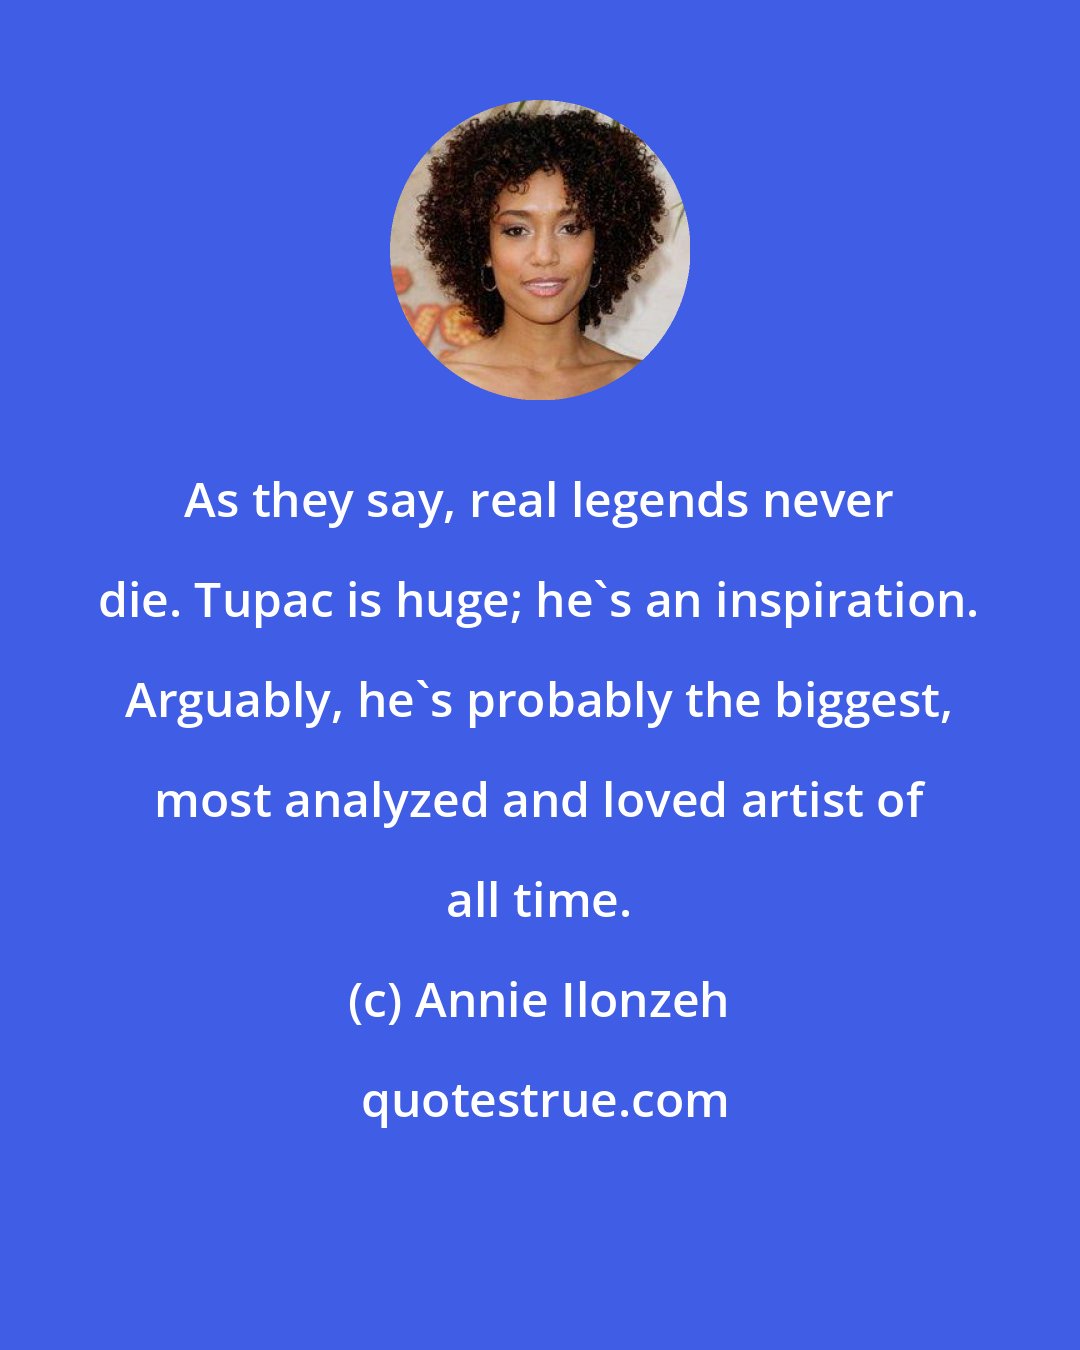 Annie Ilonzeh: As they say, real legends never die. Tupac is huge; he's an inspiration. Arguably, he's probably the biggest, most analyzed and loved artist of all time.